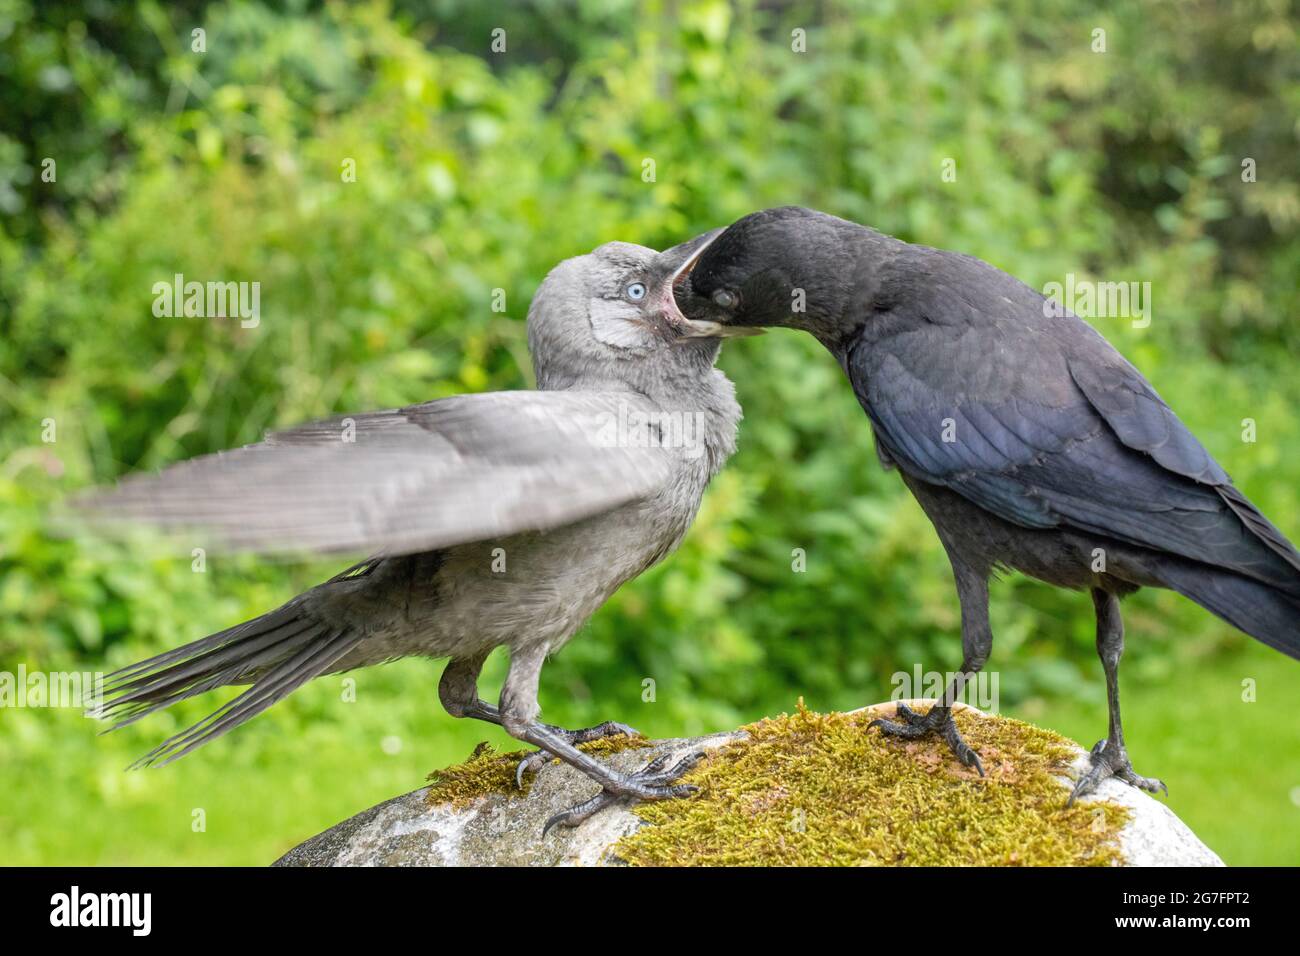 Jackdaws (Corvus monedula). Both juveniles of the year, from different nests. Grey mutation, aberrant, bird left adopting a begging to be fed posture, Stock Photo